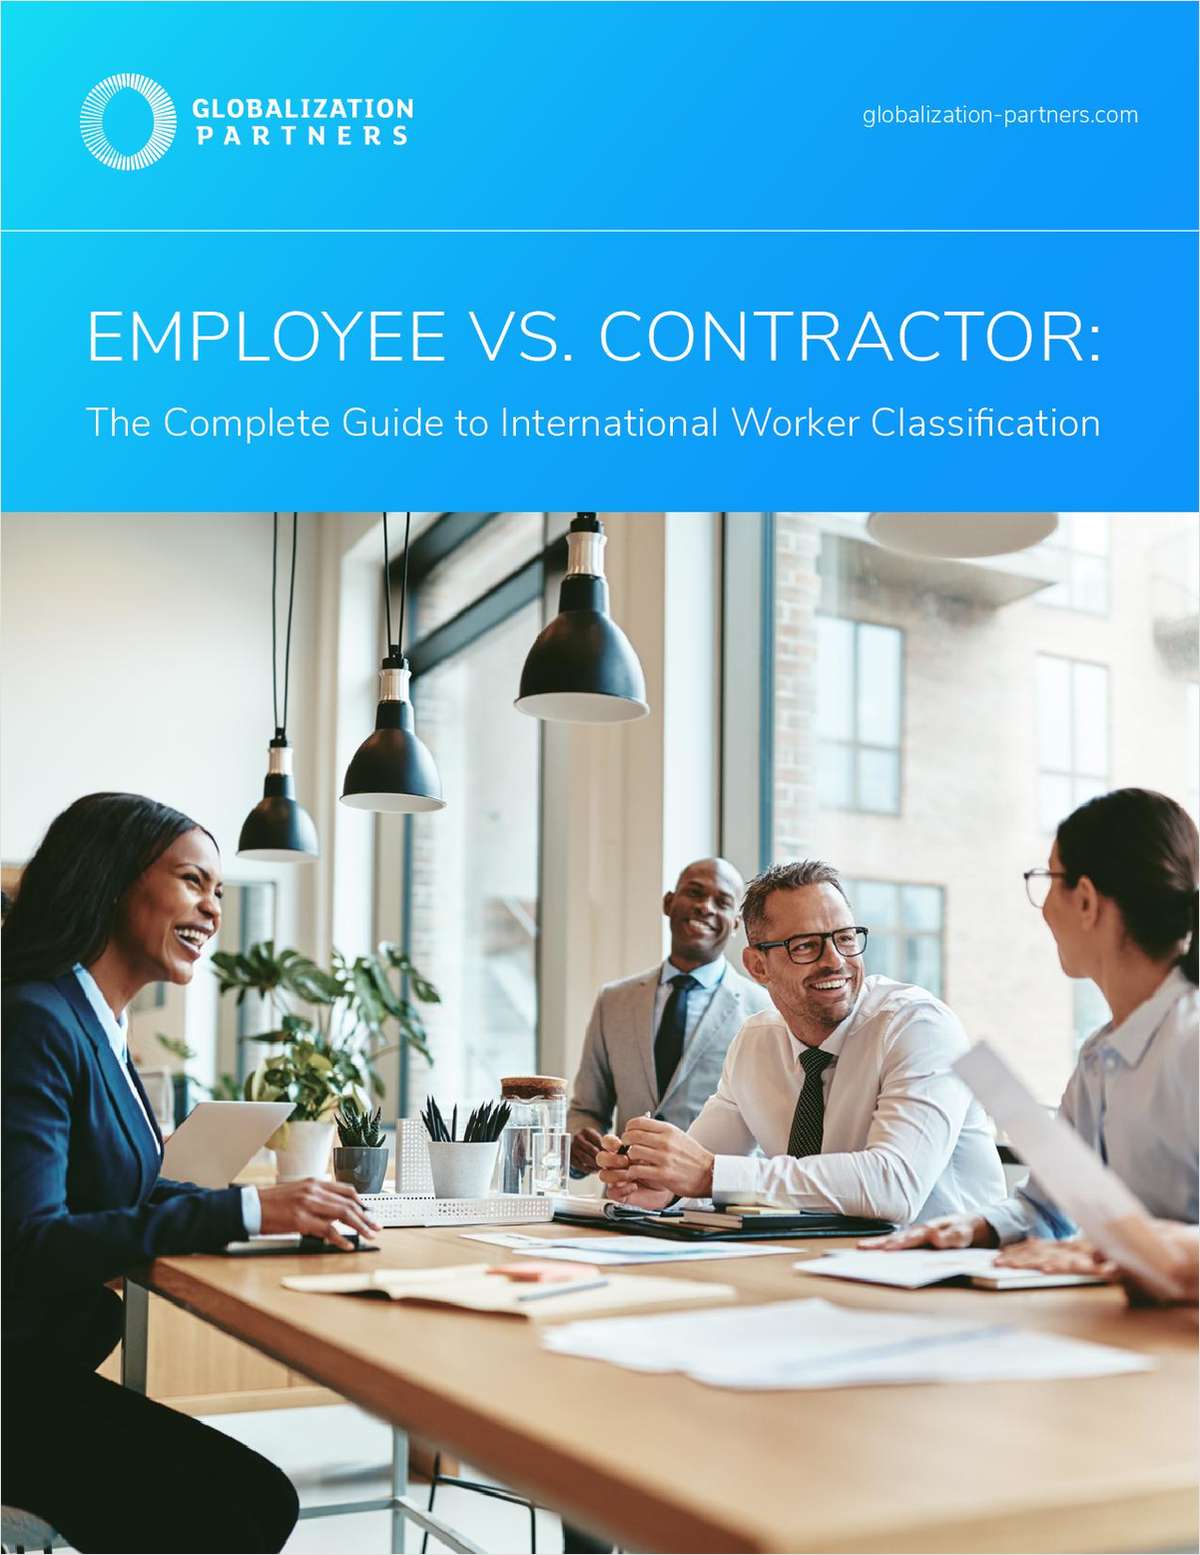 The Complete Guide to International Worker Classification